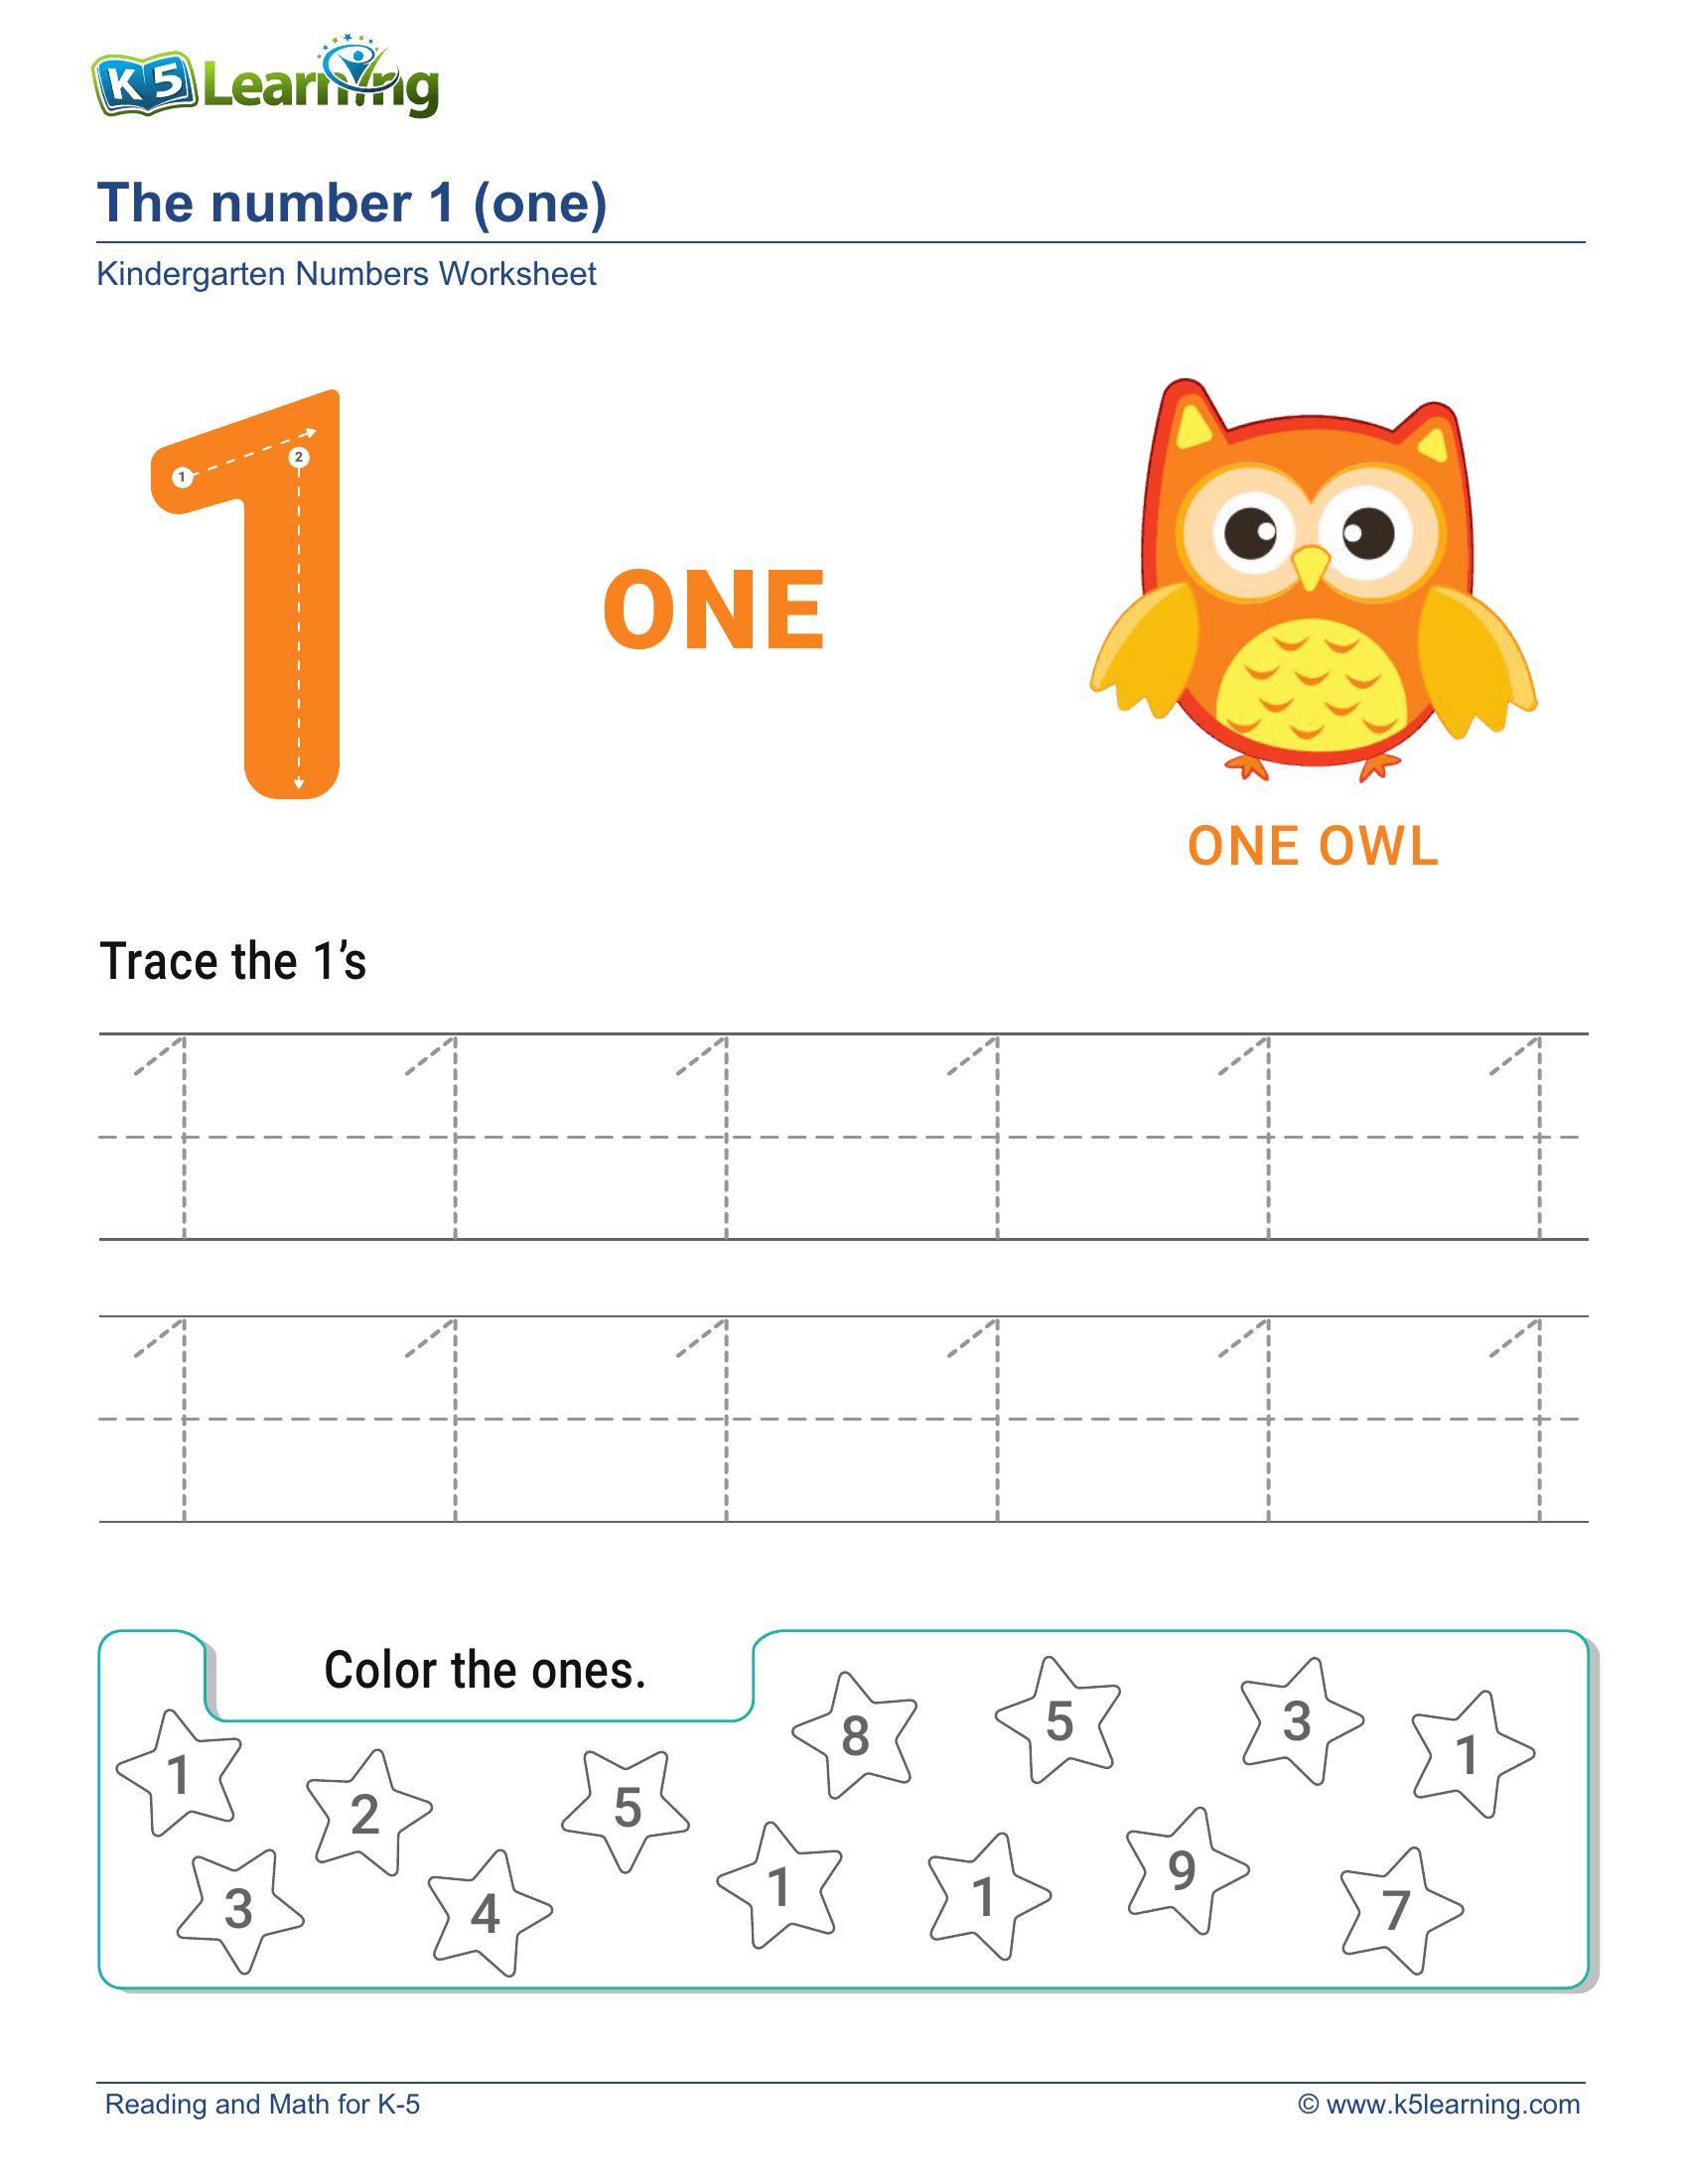 Learning & tracing numbers and count objects from 1 to 10